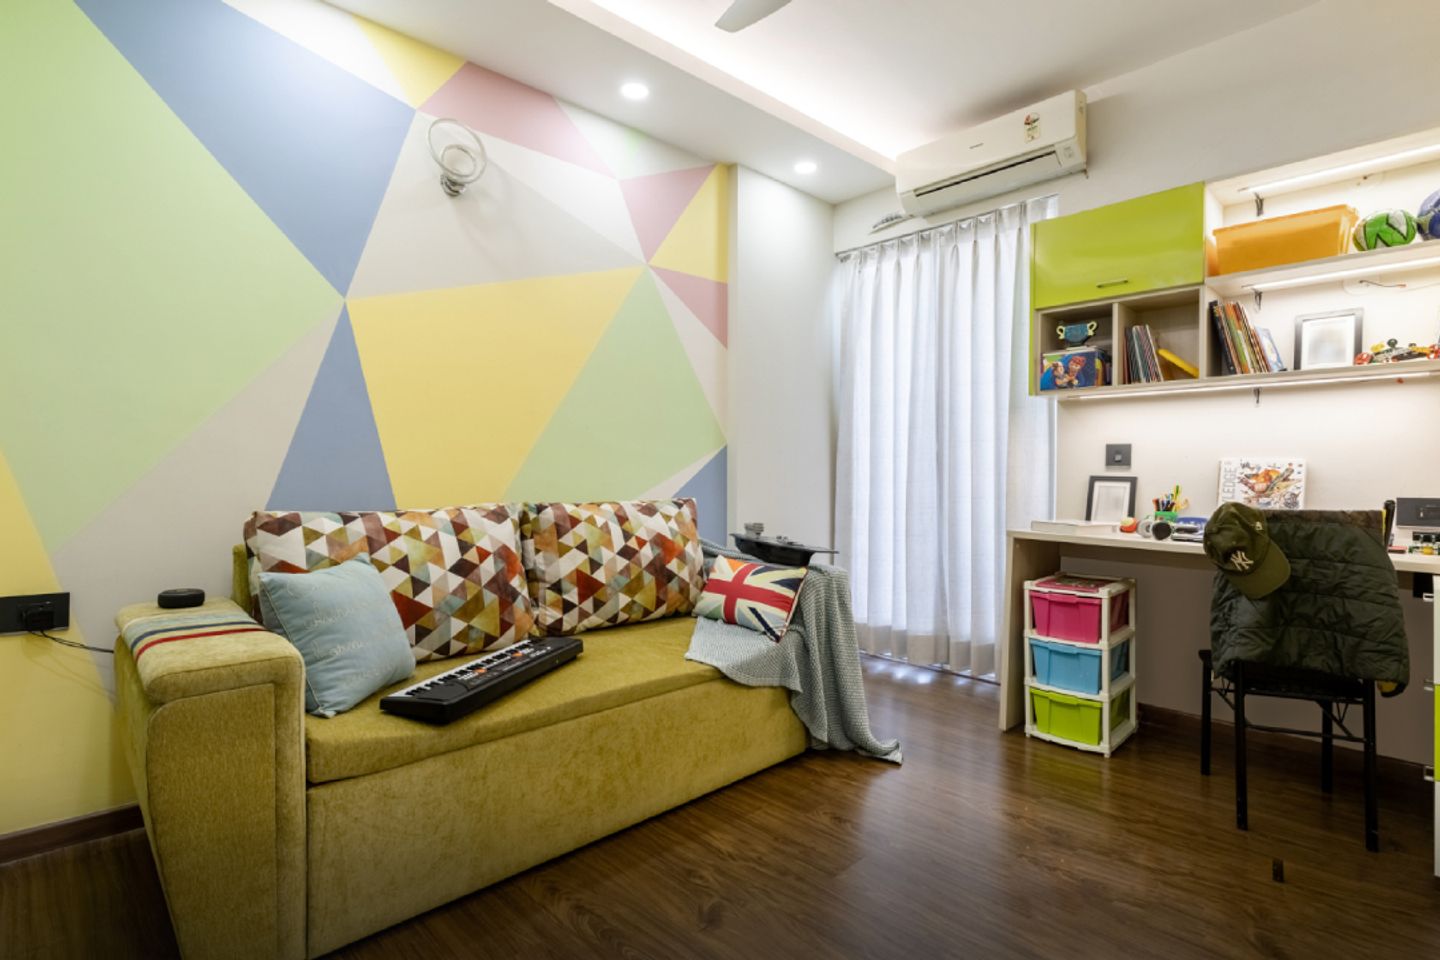 10x11 Boys Room Design With Abstract Wallpaper - Livspace